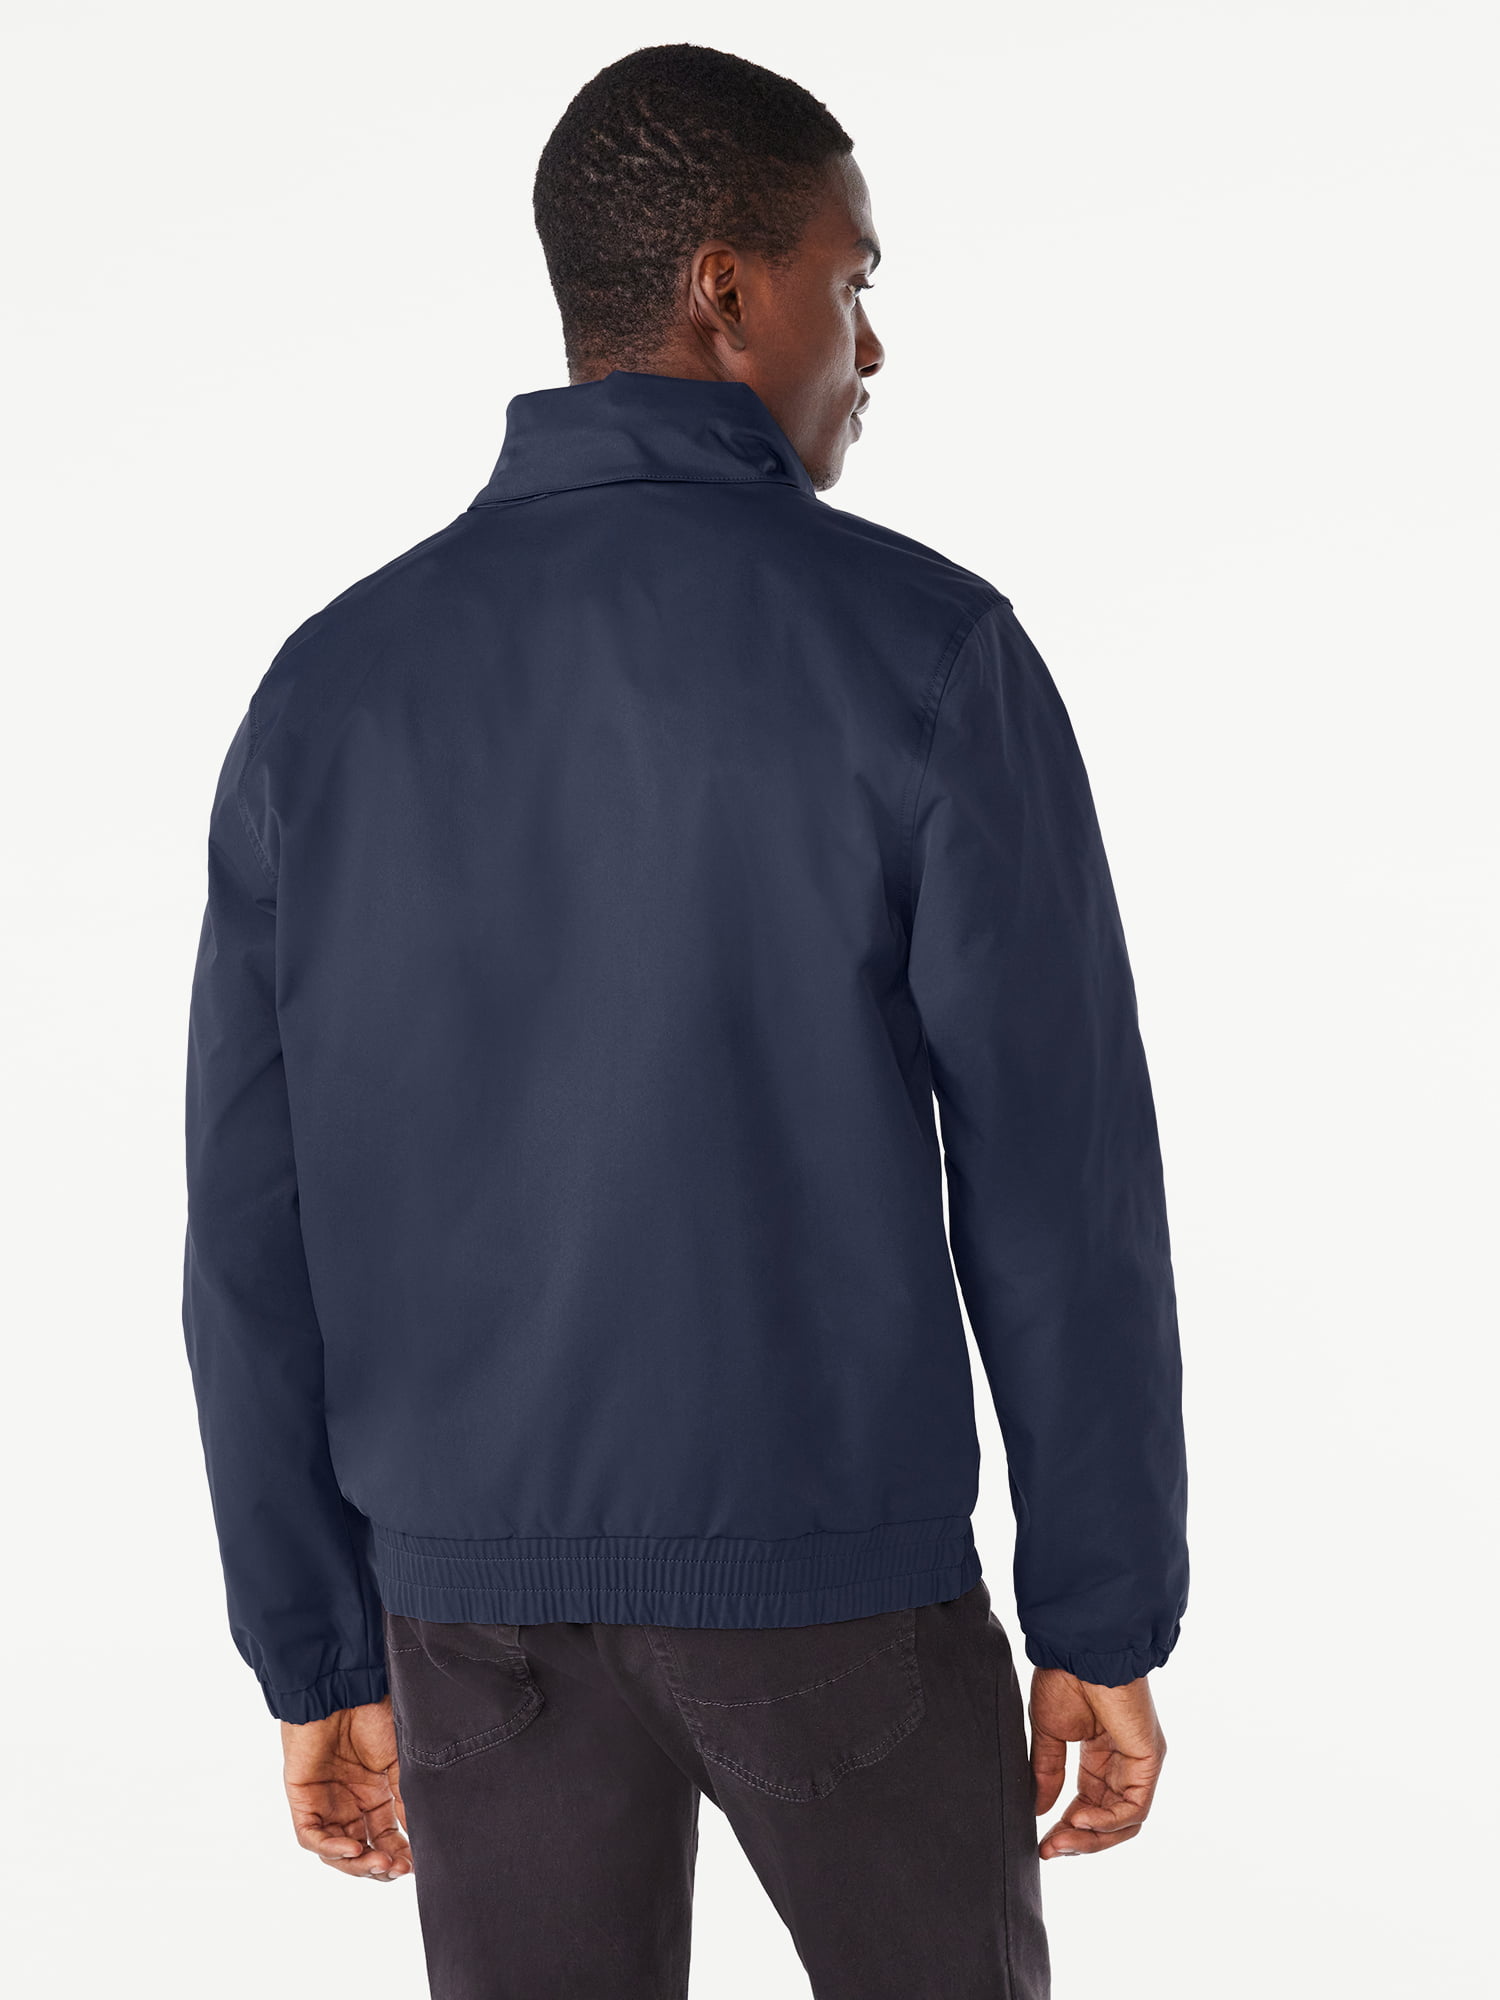 Free Assembly Men's Twill Bomber Jacket with Hidden Hood, Sizes XS 